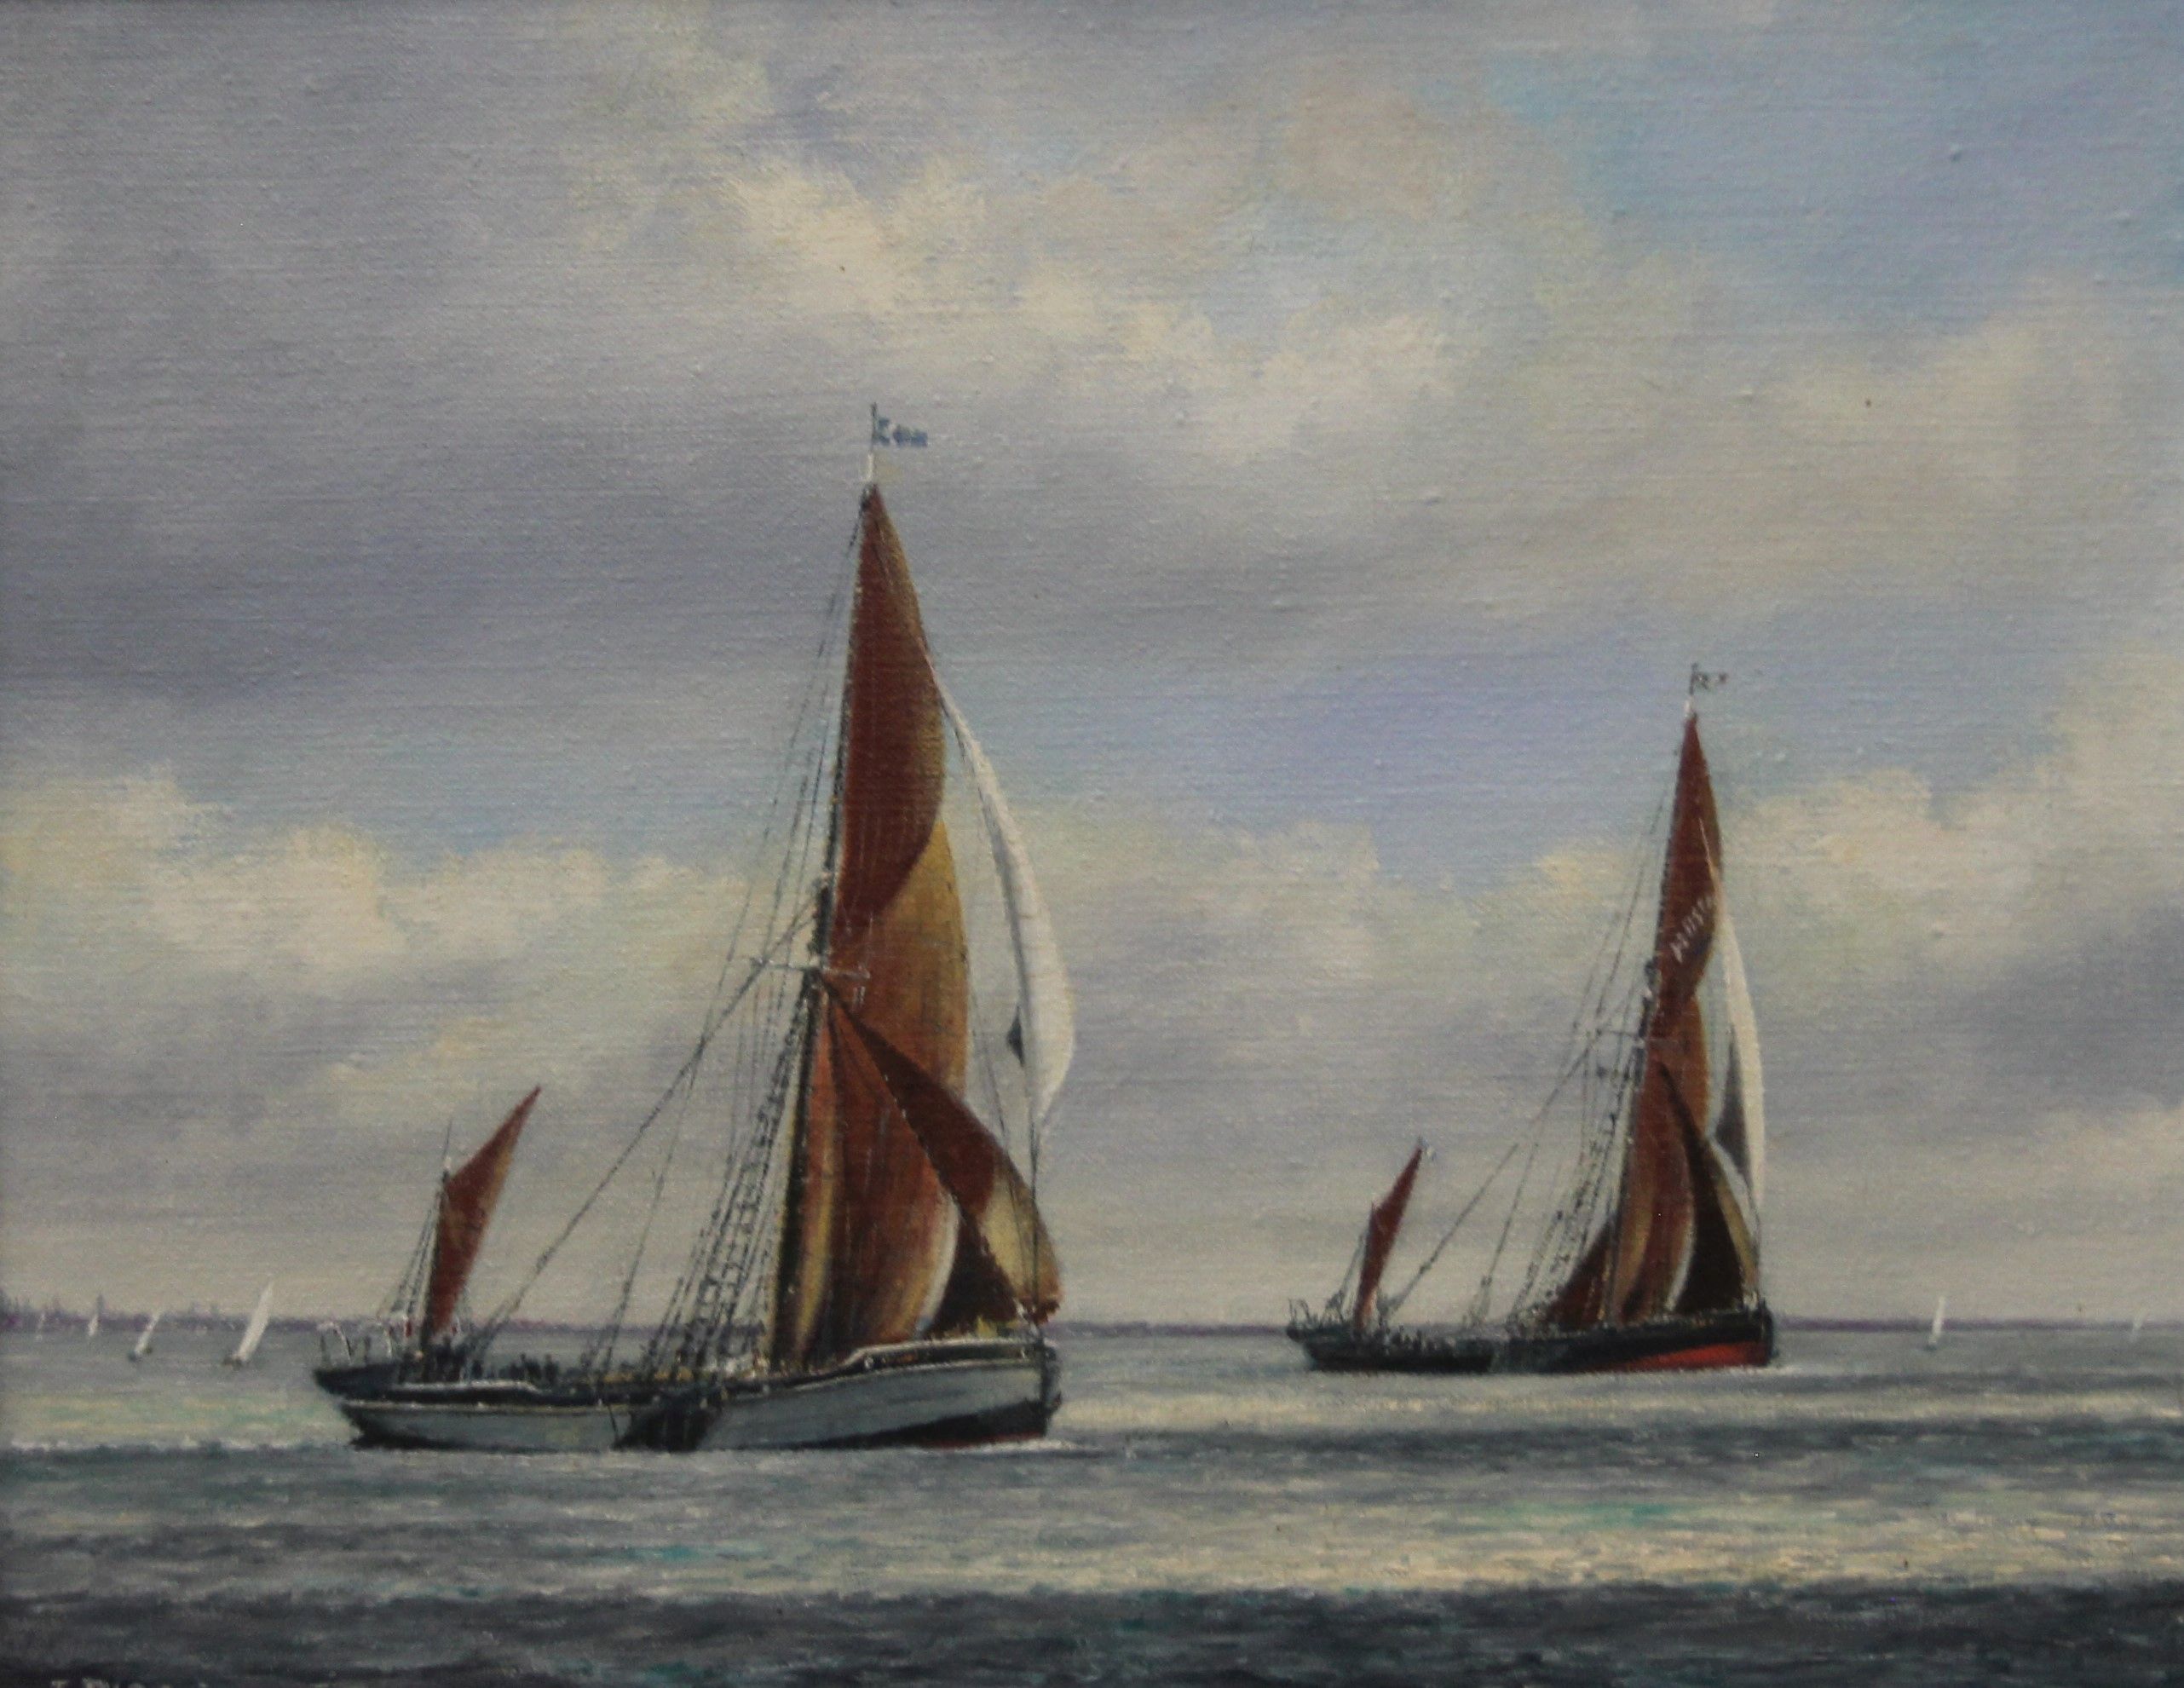 JACK RIGG (born 1927), Sailing Barges Reminder and Xylonite in Pin Mill Match 1980, oil on canvas,